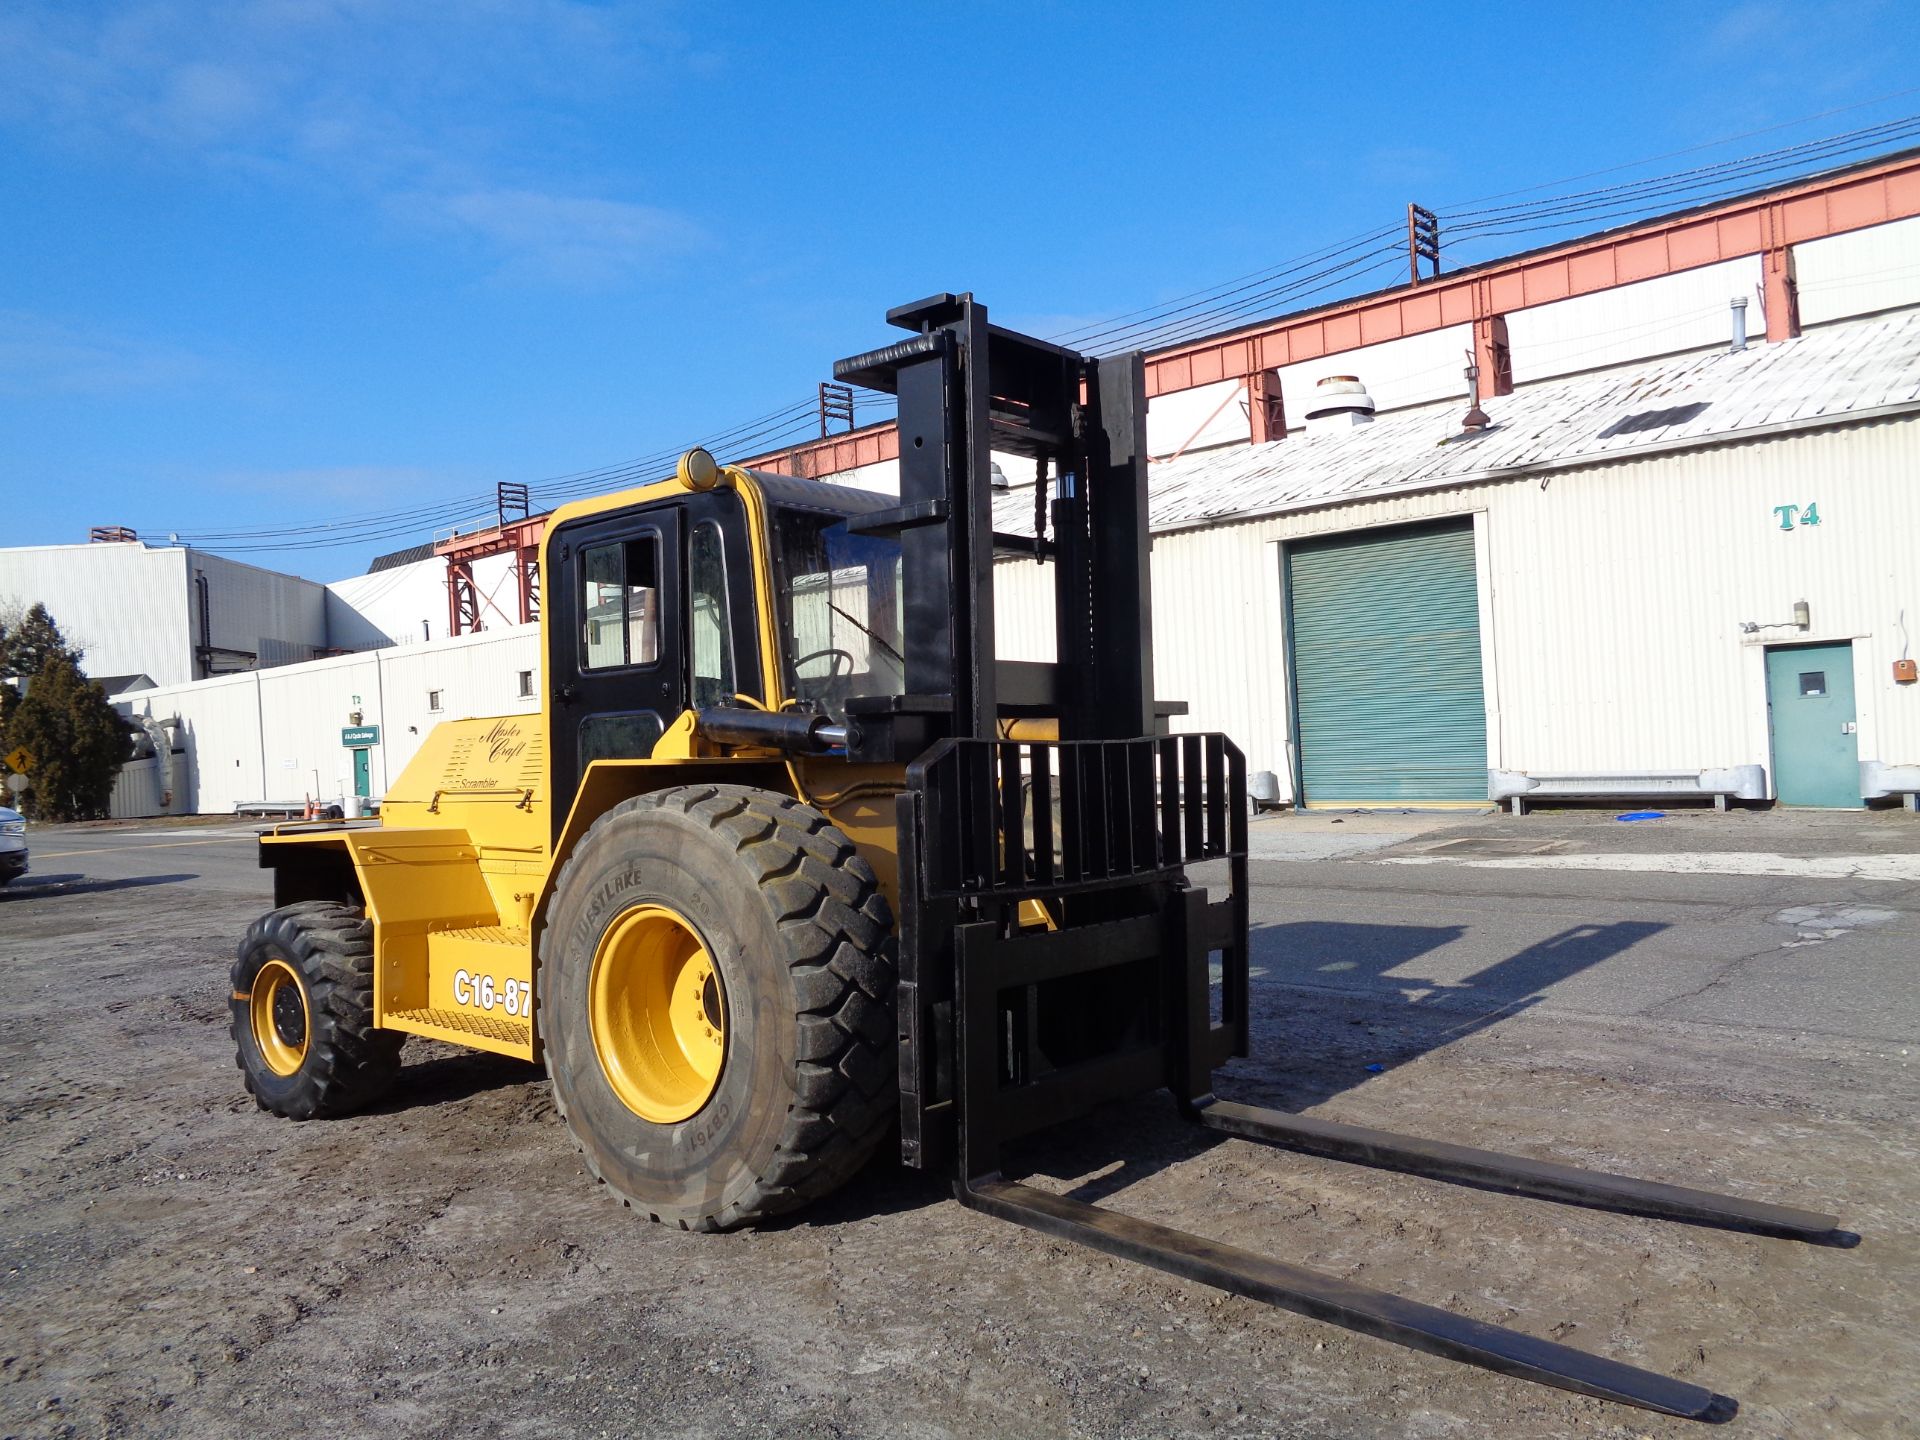 2008 Master Craft C16.874 16,000 lbs Rough Terrain 4x4 Forklift - Image 8 of 12